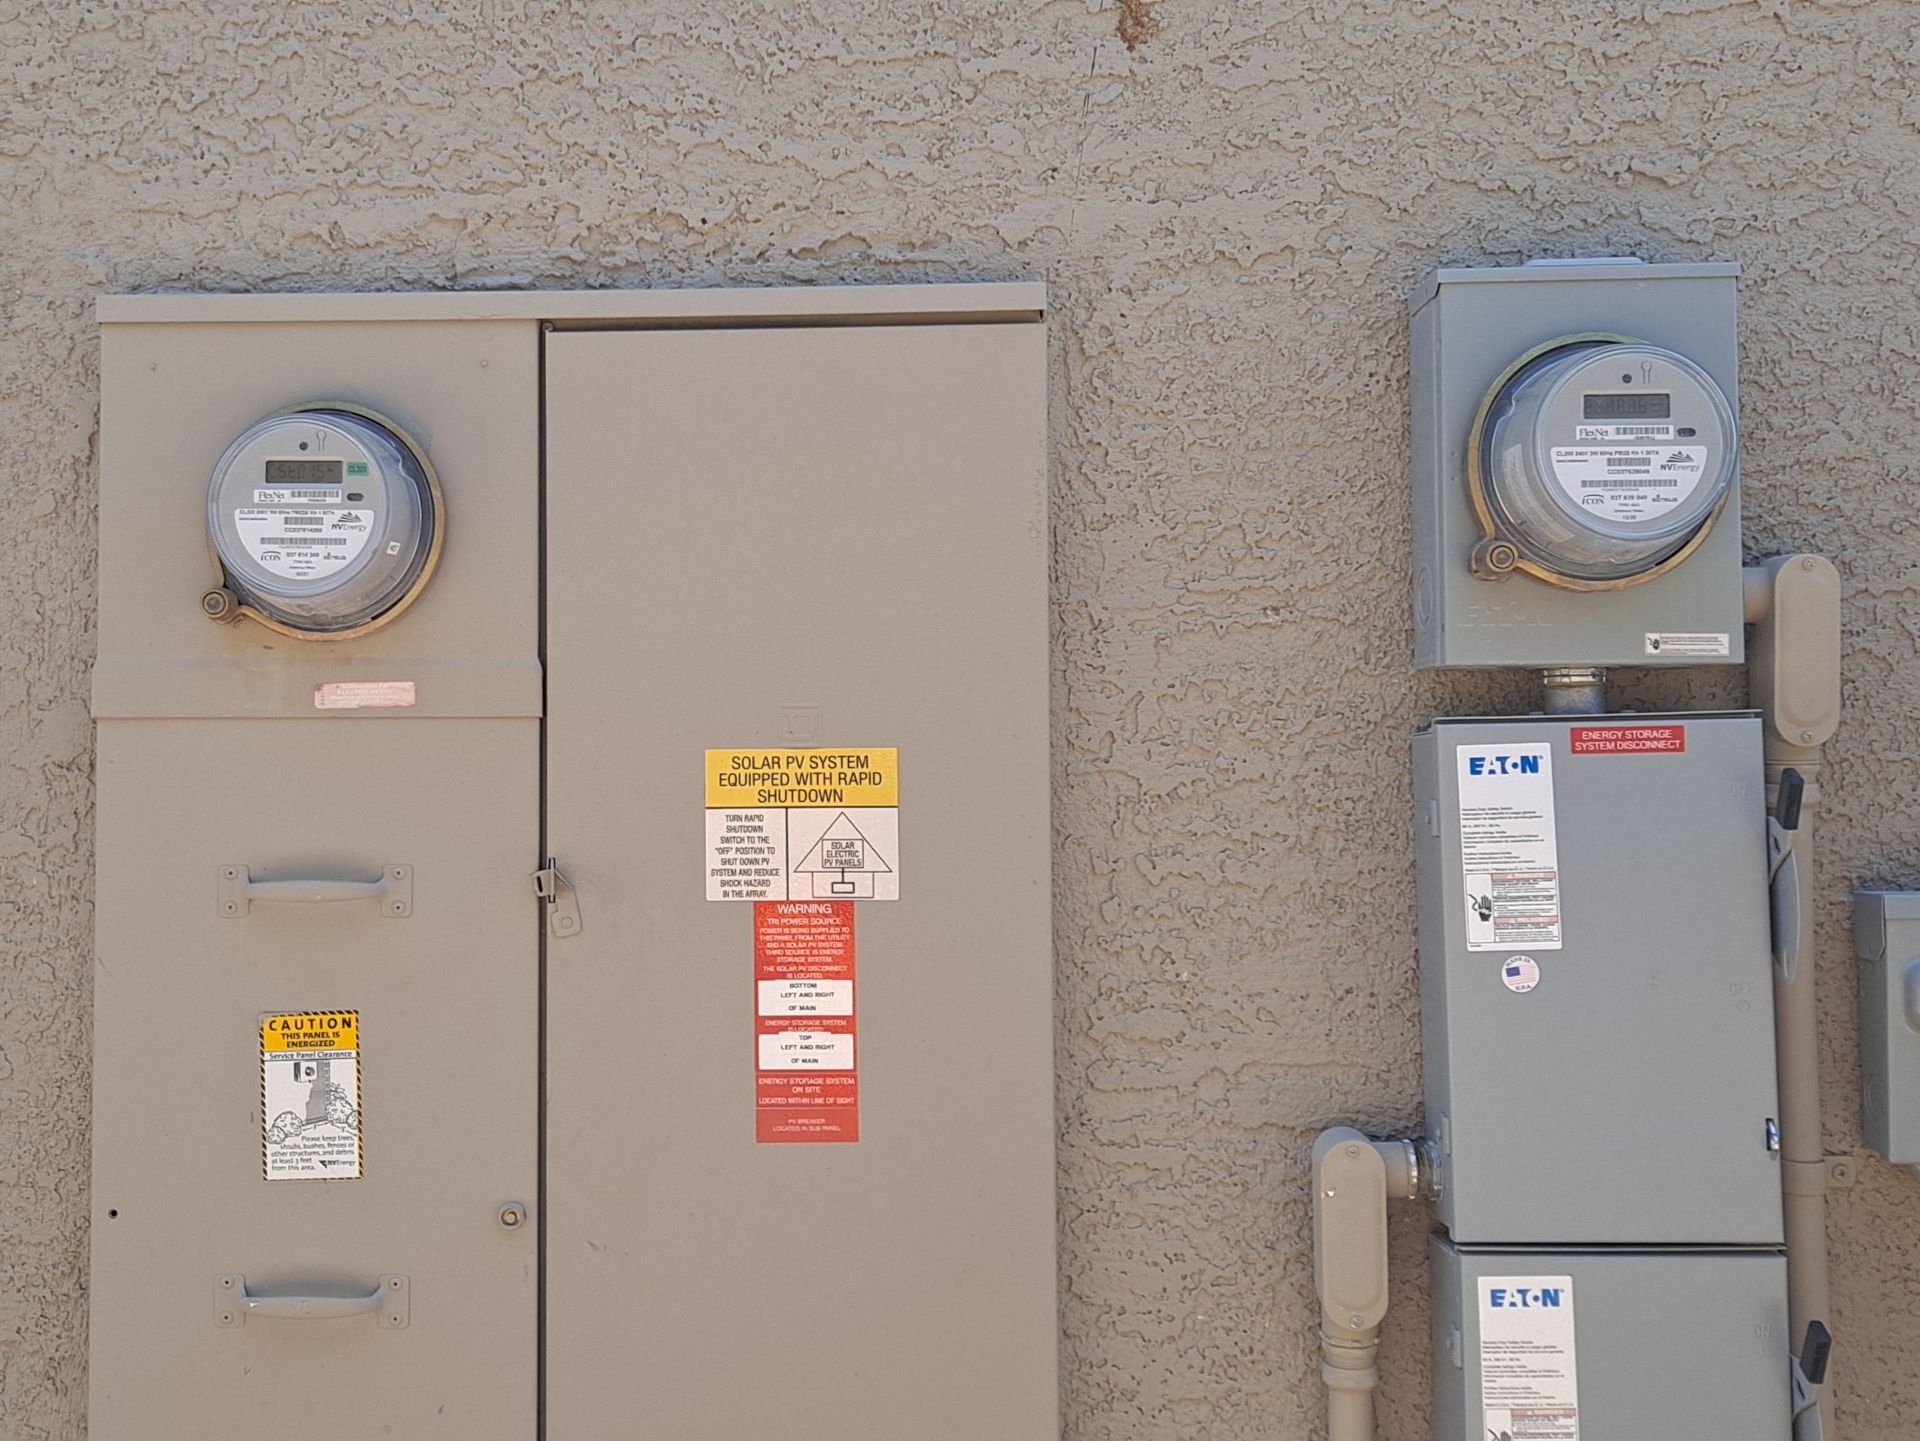 How to read a NV Energy Meter